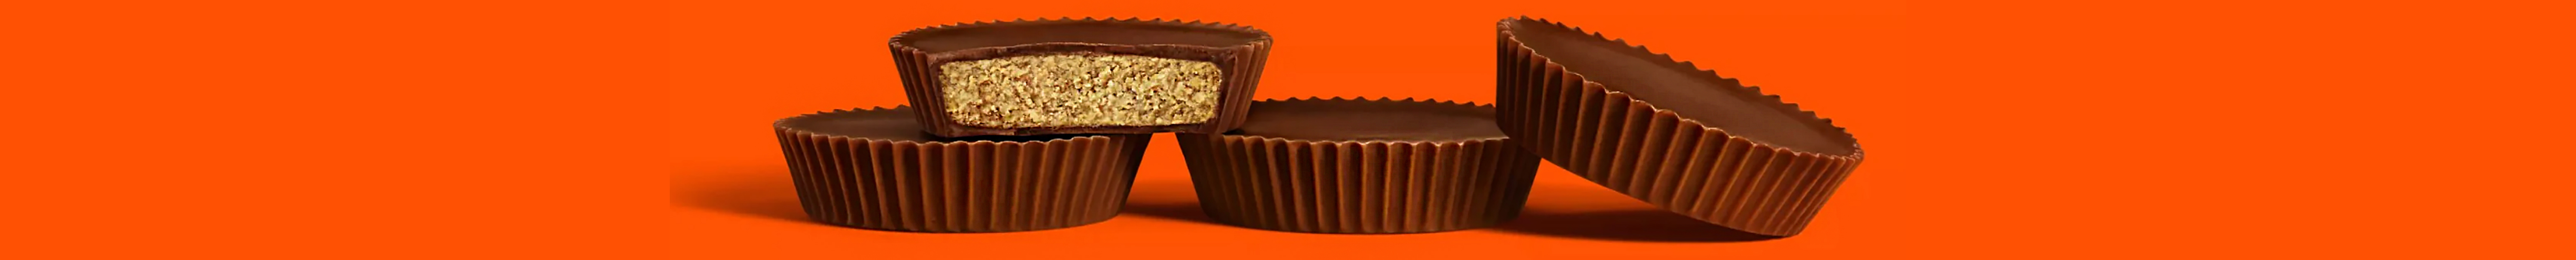 Reeses Footer Image